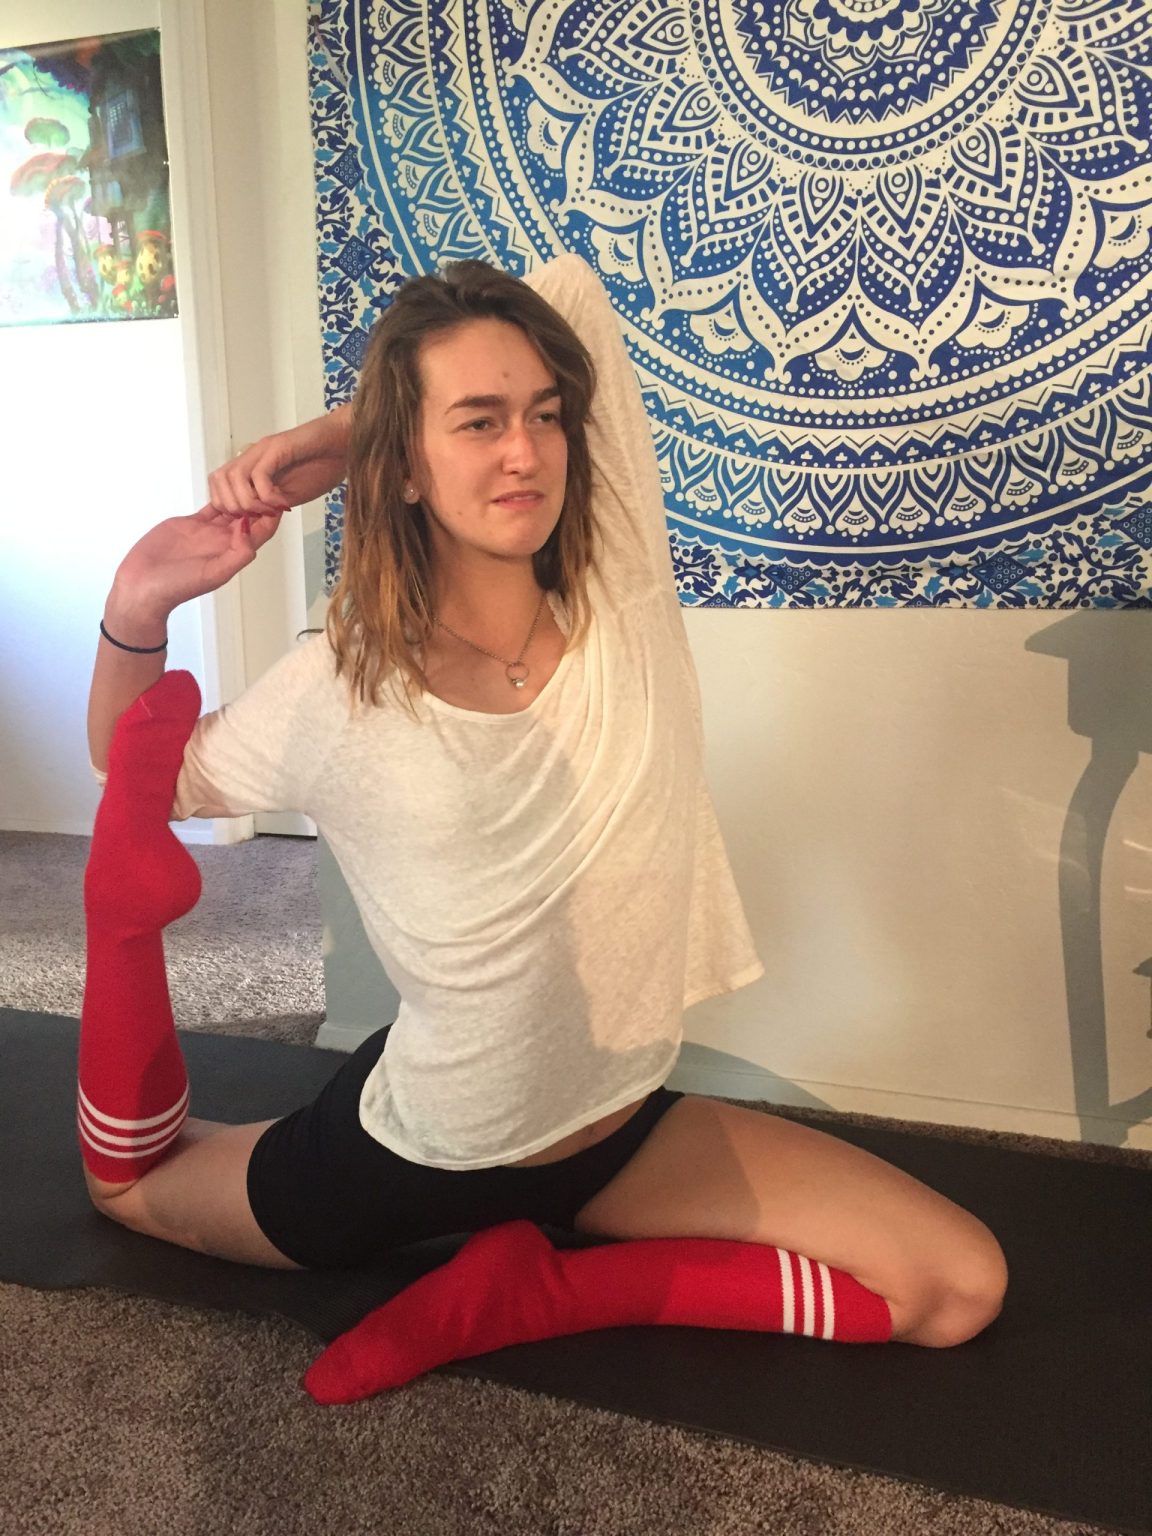 girl holding a yoga pose at home on yoga mat wearing black shorts, white top and red tube socks